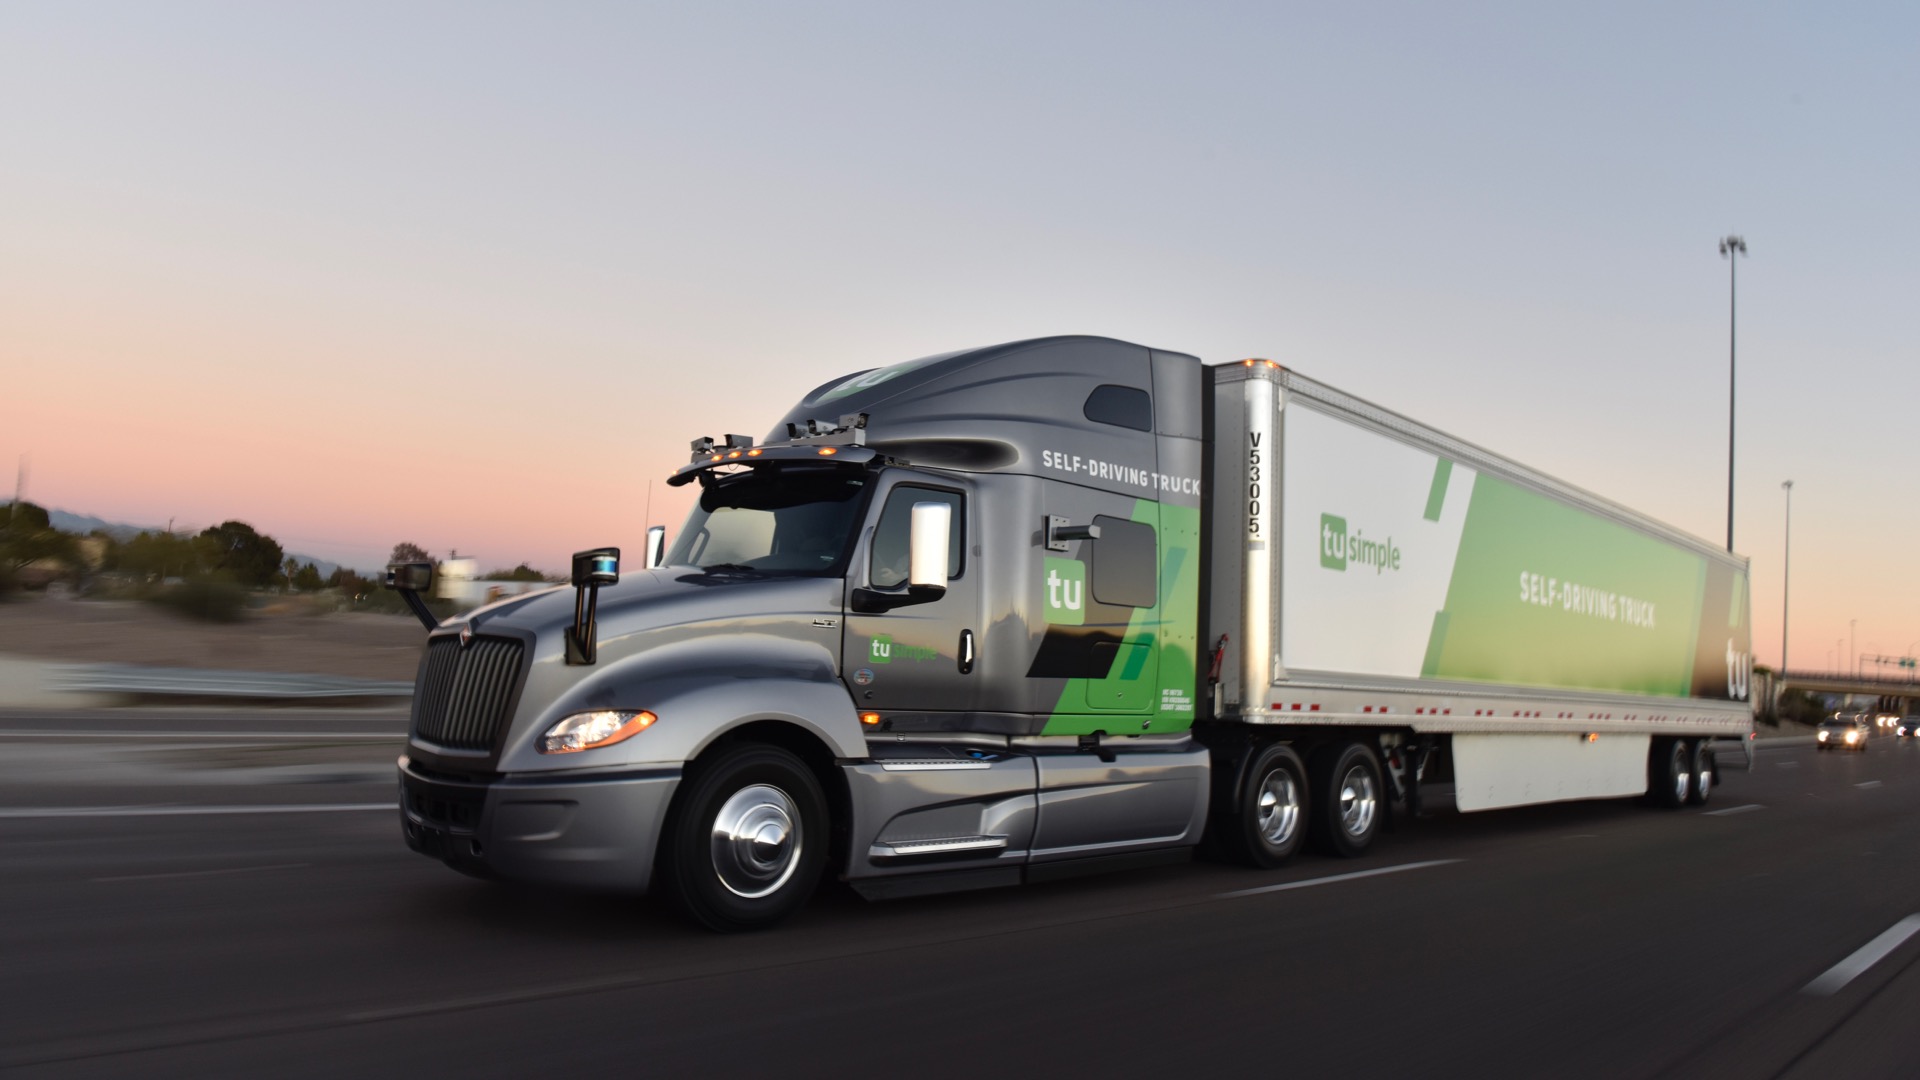 New Nighttime Camera System Will Allow Autonomous Trucks to Increase Productivity